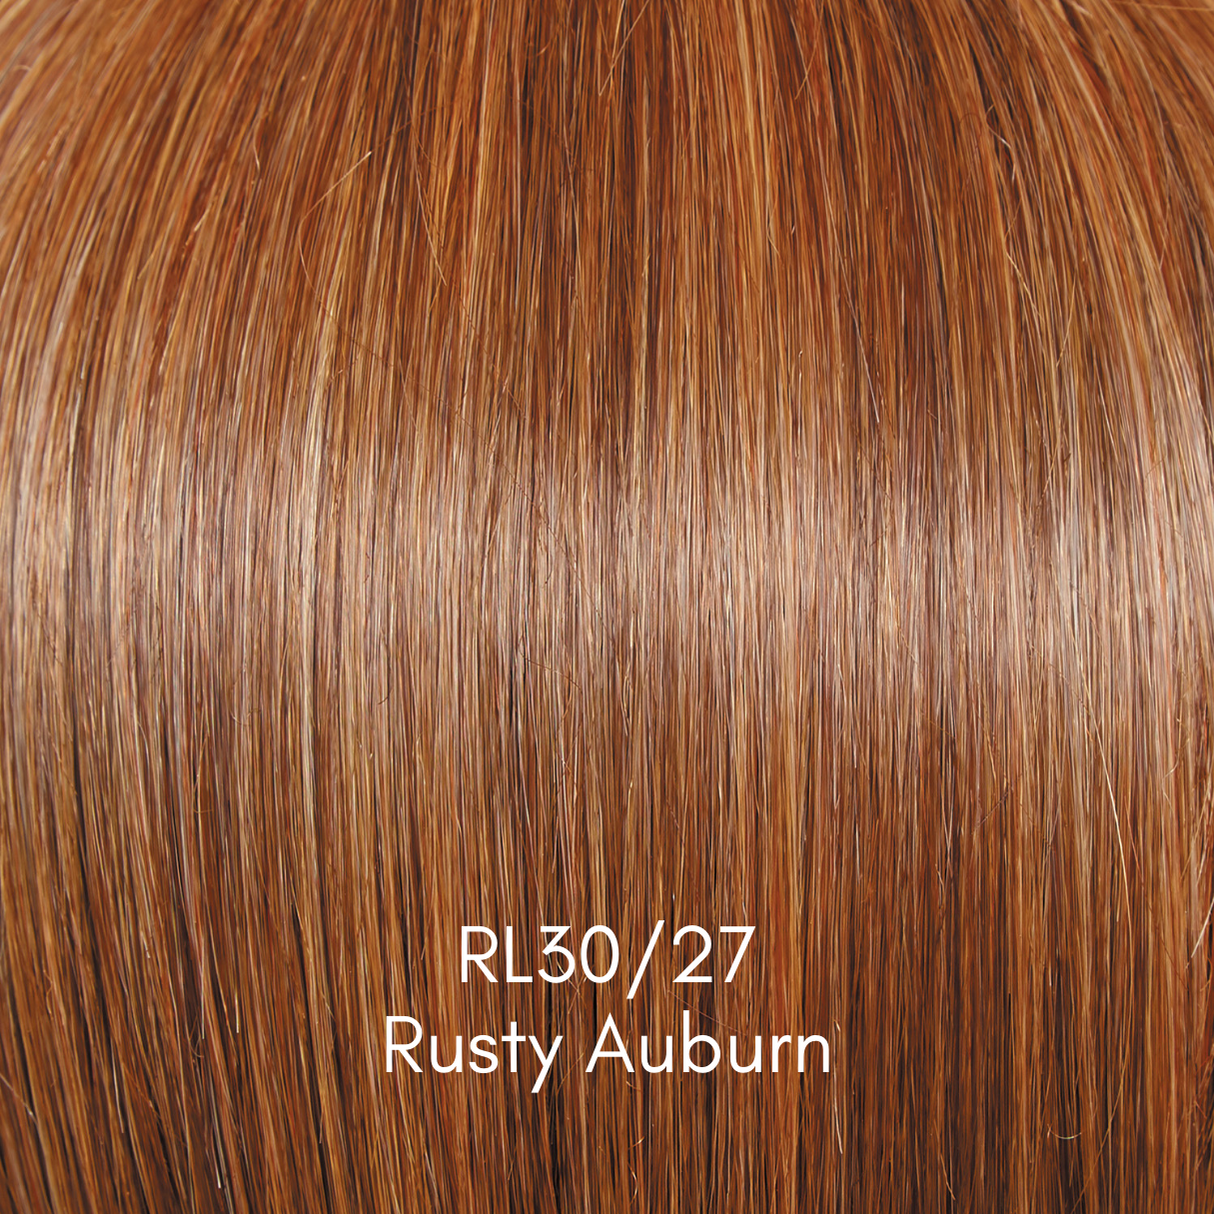 Always Large Cap - Signature Wig Collection by Raquel Welch